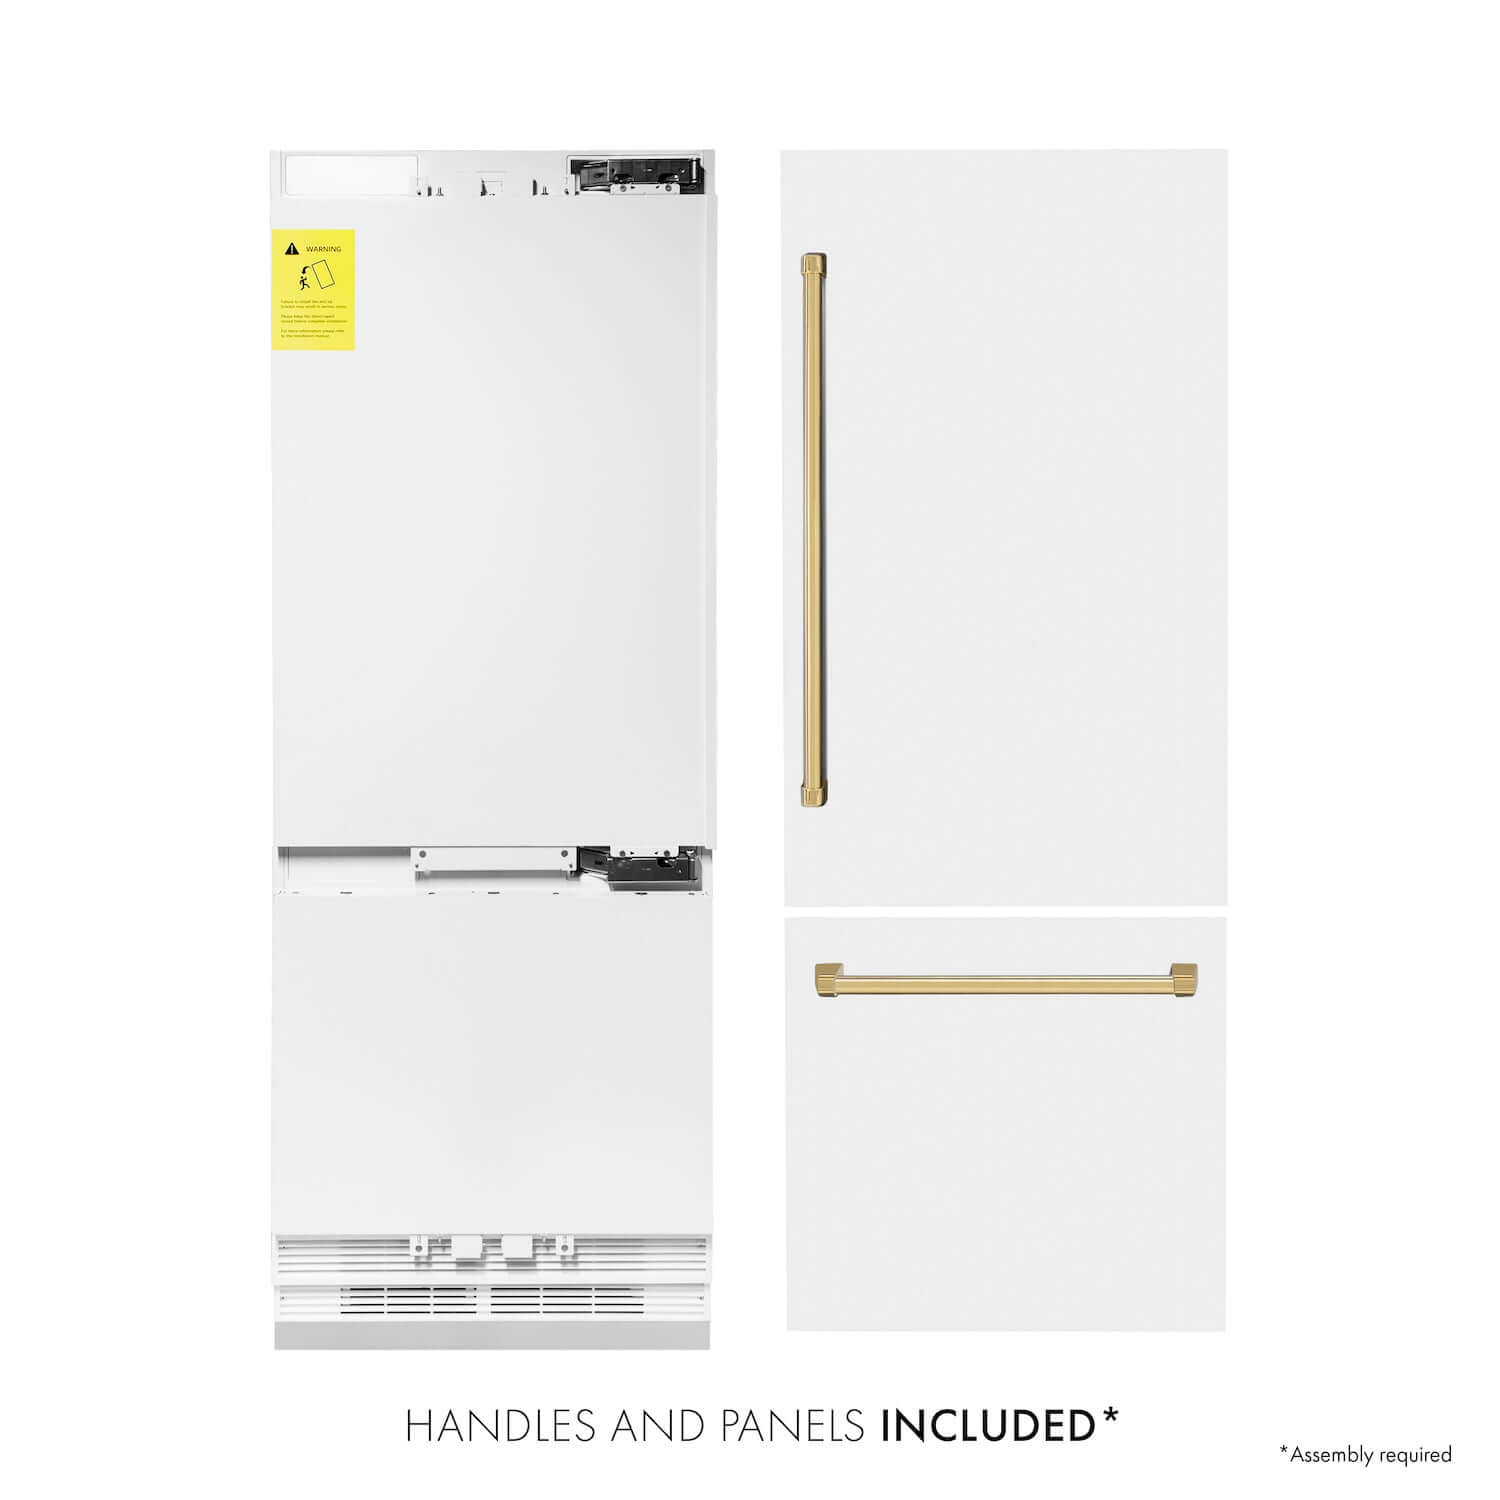 ZLINE Autograph Edition 30 in. 16.1 cu. ft. Built-in 2-Door Bottom Freezer Refrigerator with Internal Water and Ice Dispenser in White Matte with Polished Gold Accents (RBIVZ-WM-30-G) front, refrigeration unit, panels, and handles separated .